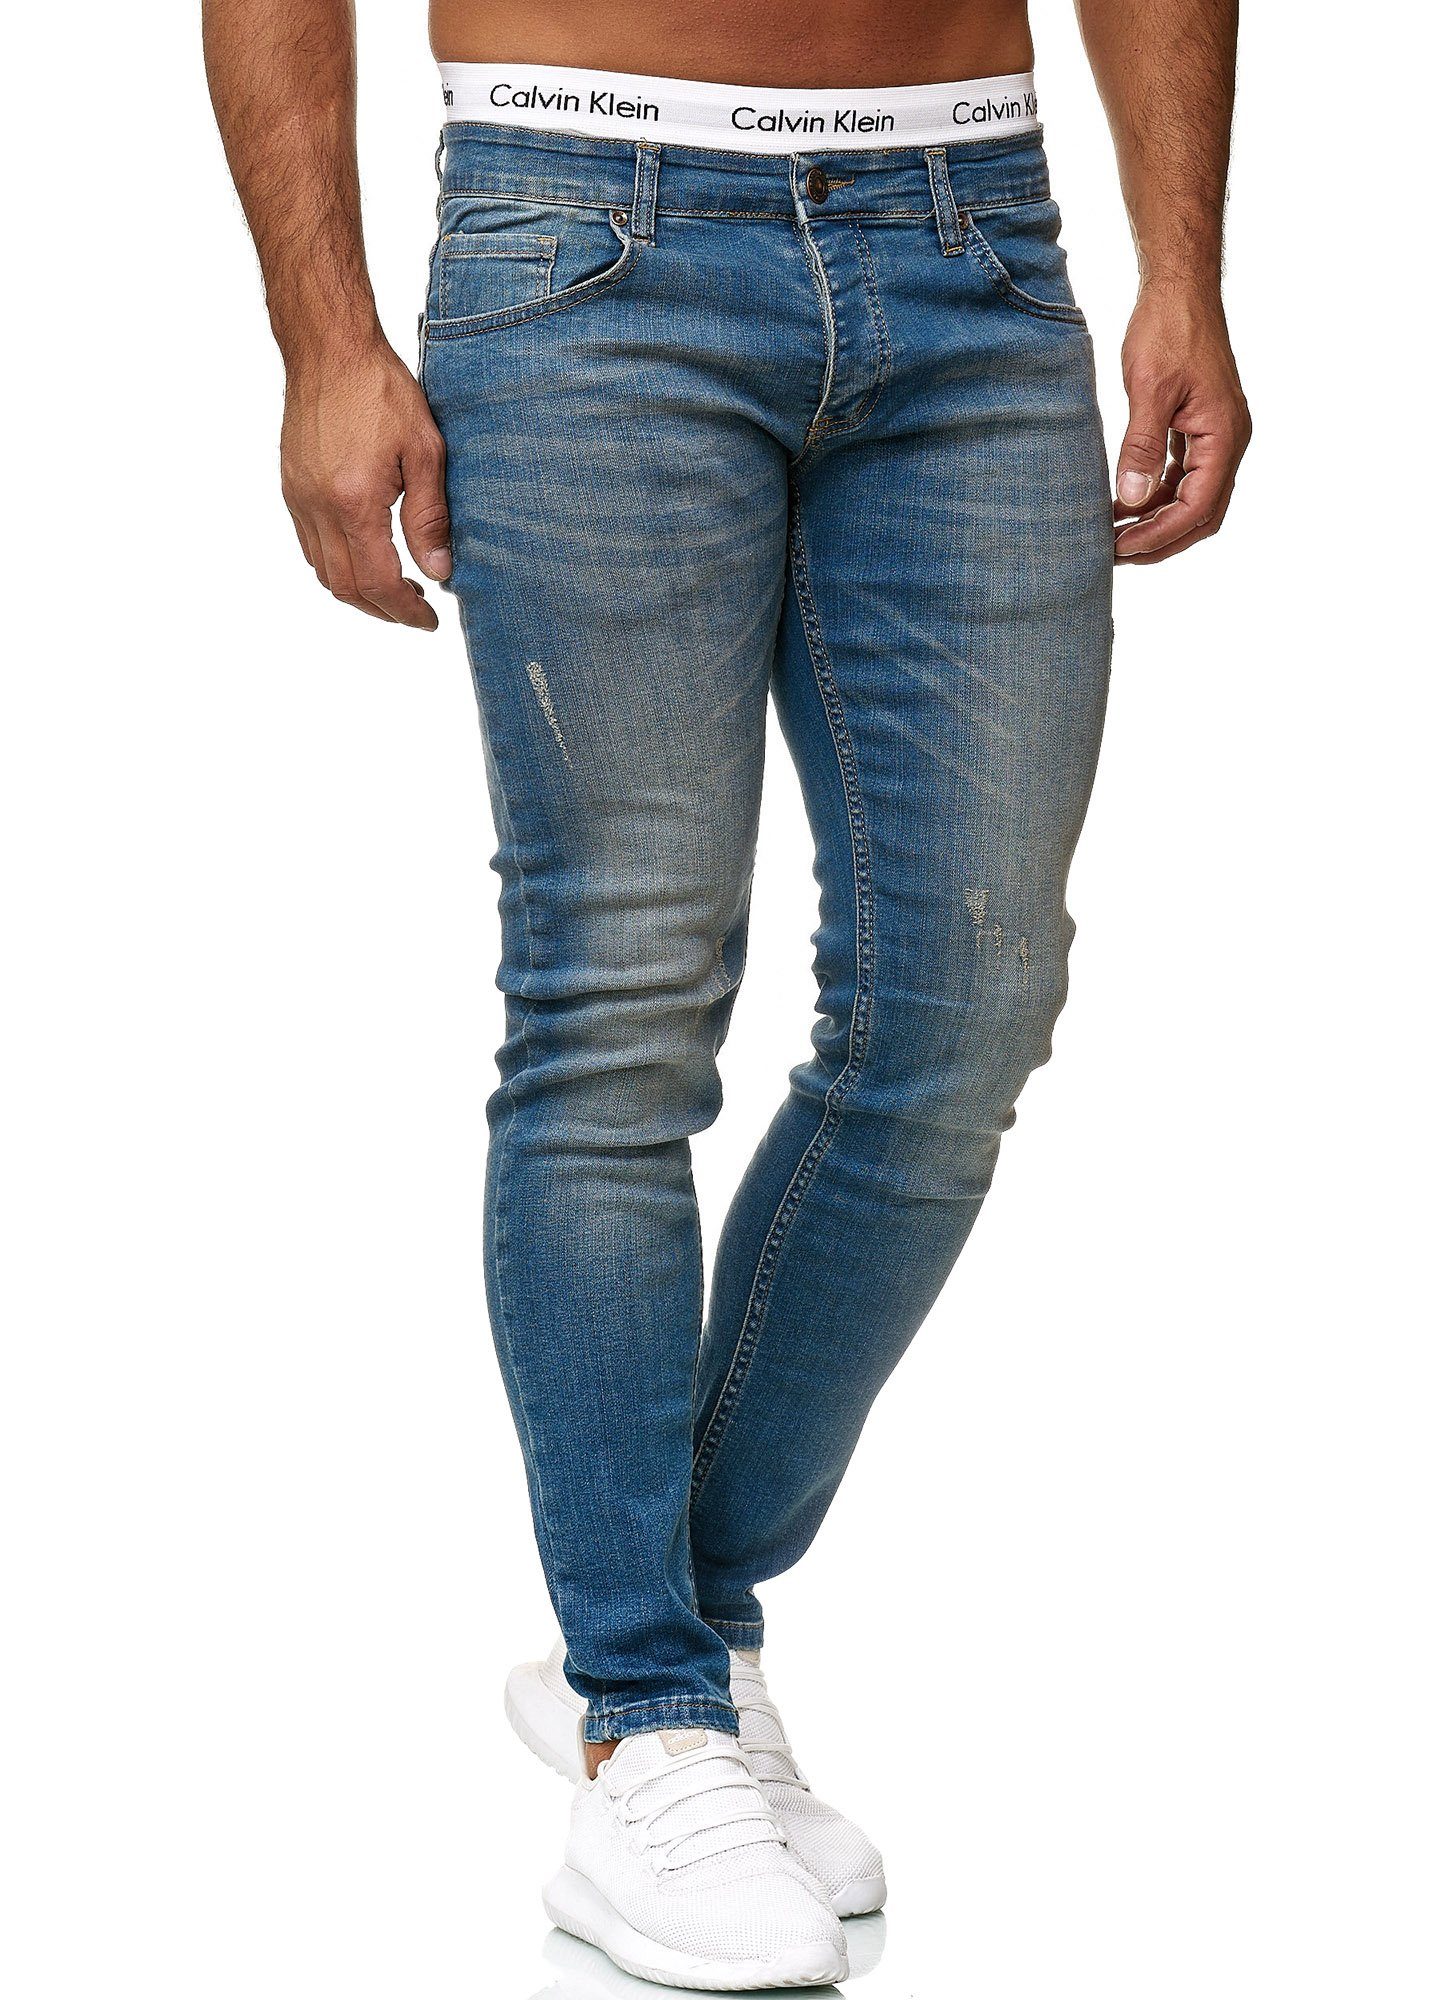 OneRedox Straight-Jeans 600JS (Jeanshose Designerjeans Bootcut, 1-tlg) Freizeit Business Casual 613 Dirty Blue Used